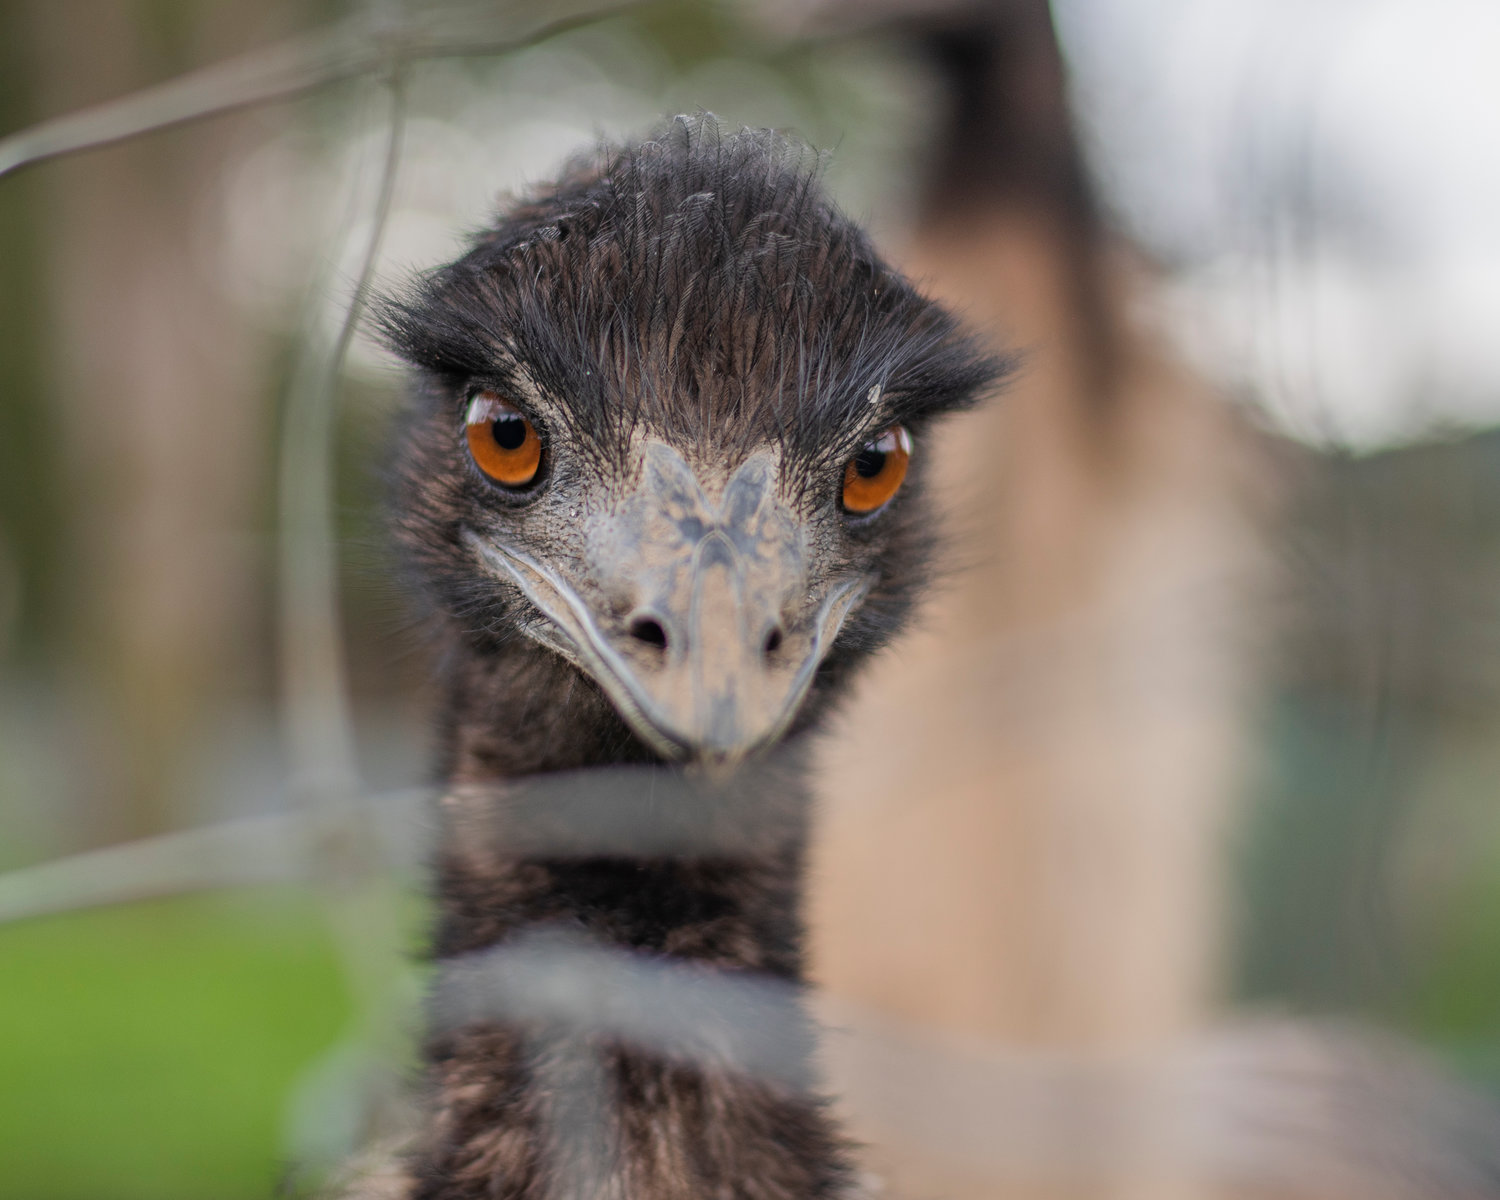 An emu eyes down the camera Friday at 3 Feathers Emu Ranch and Farm in Adna.